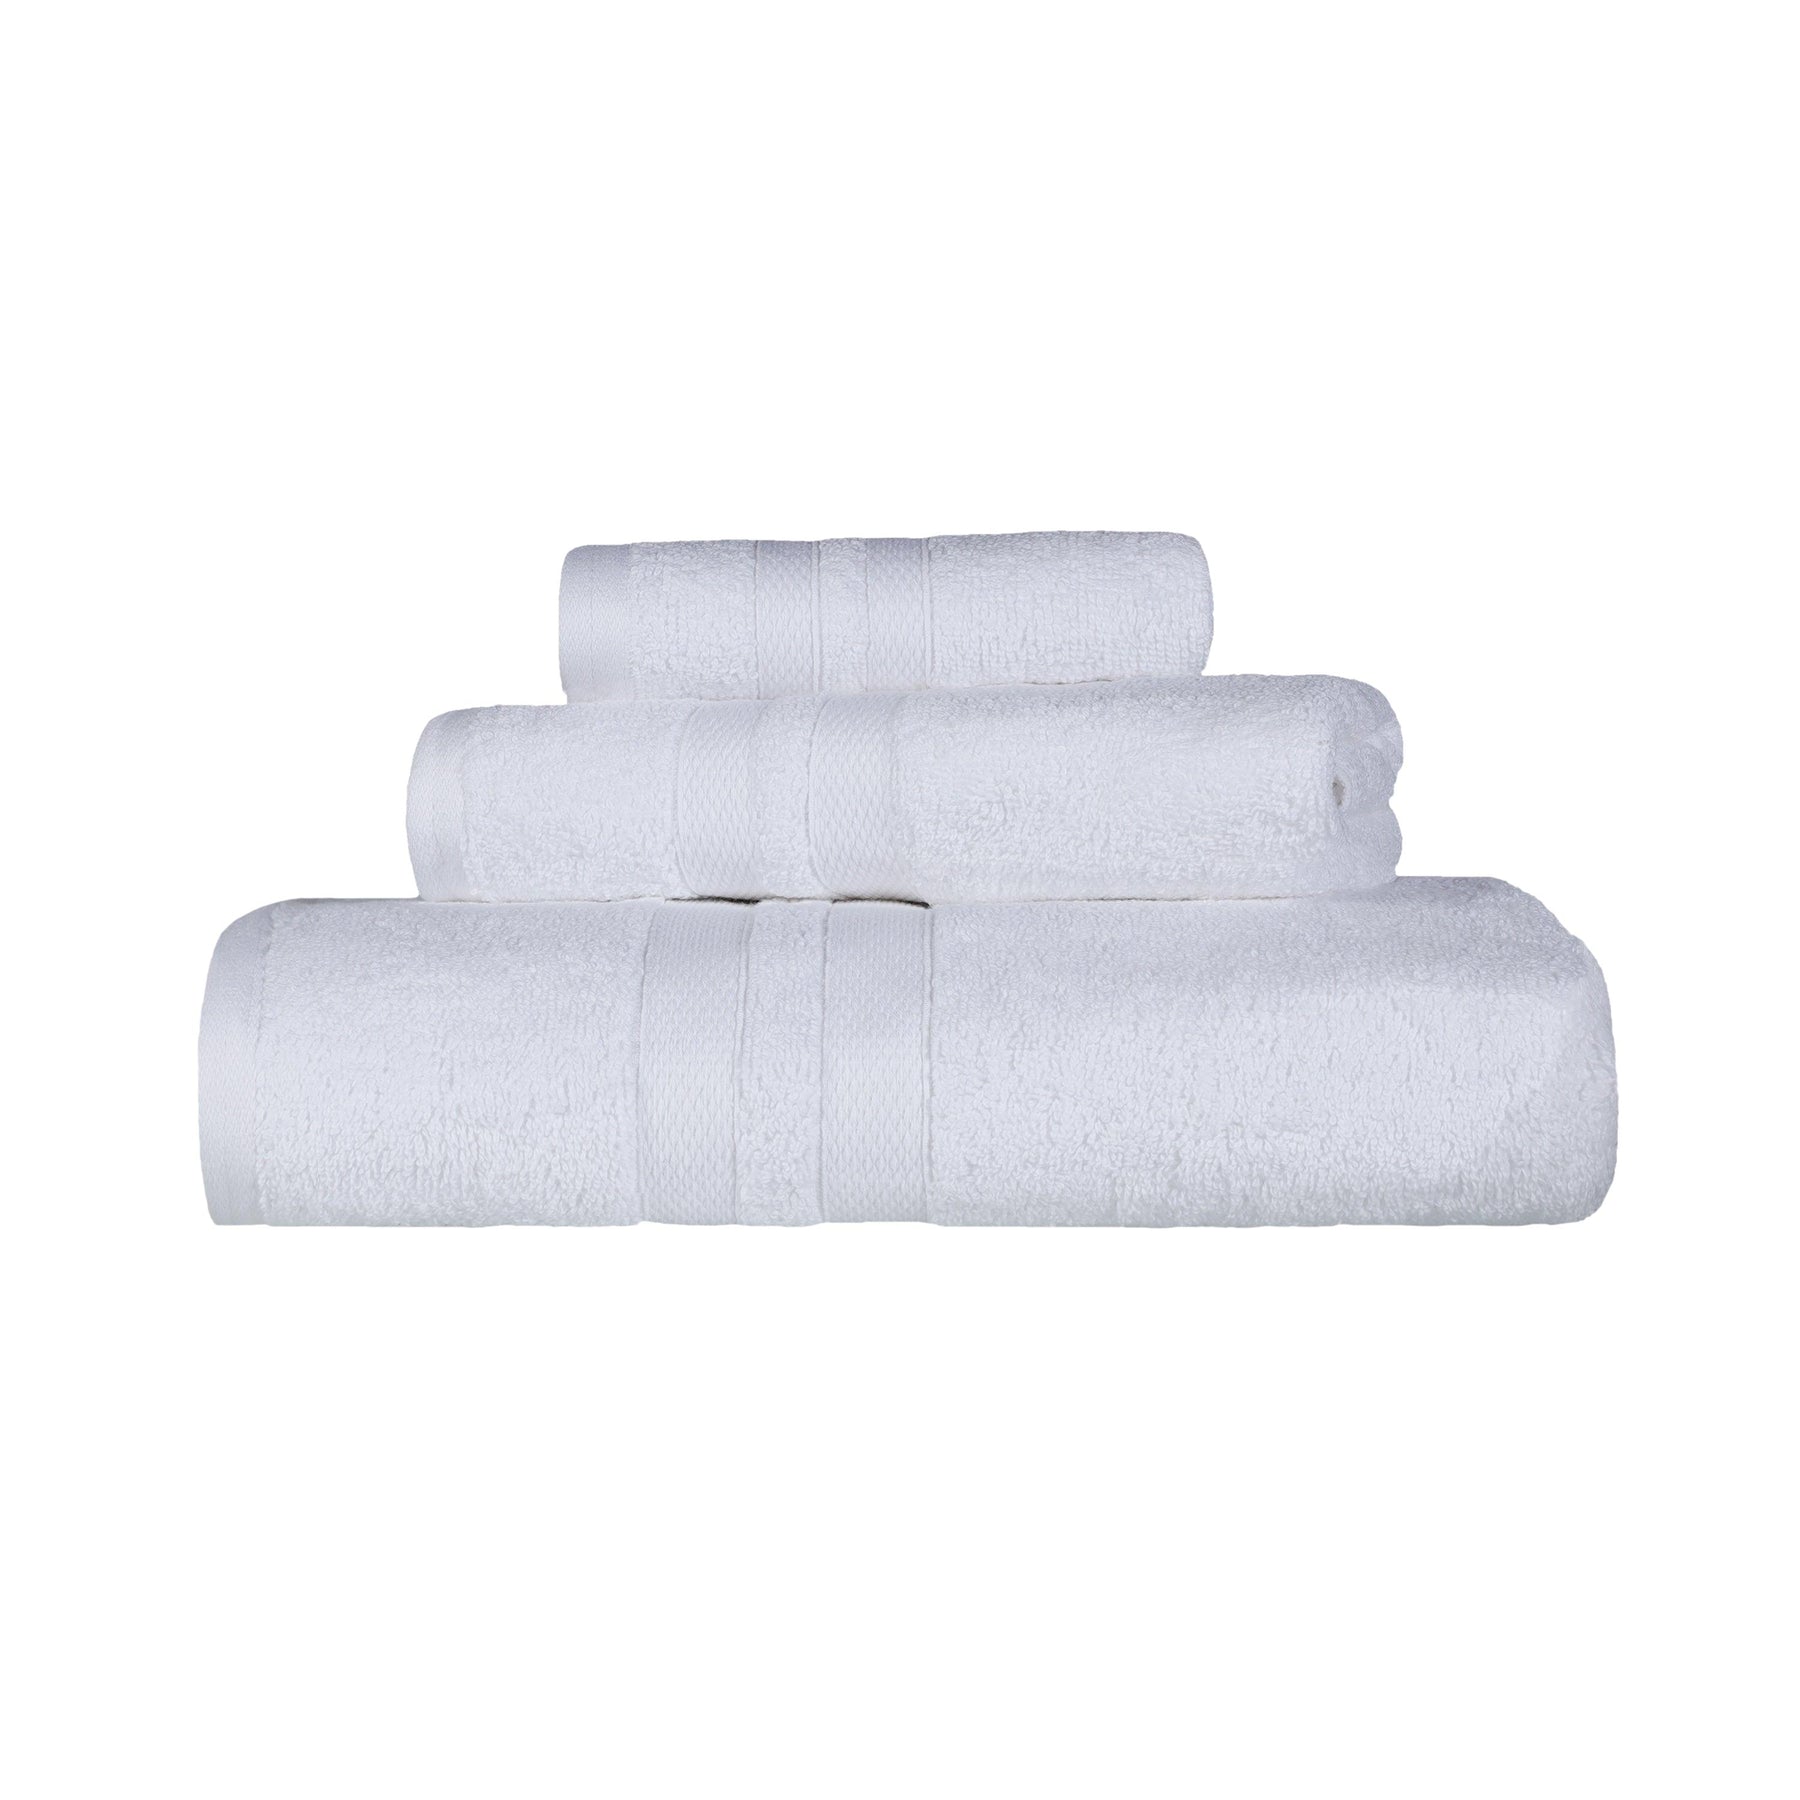 Superior Ultra Soft Cotton Absorbent Solid Assorted 3-Piece Towel Set -White